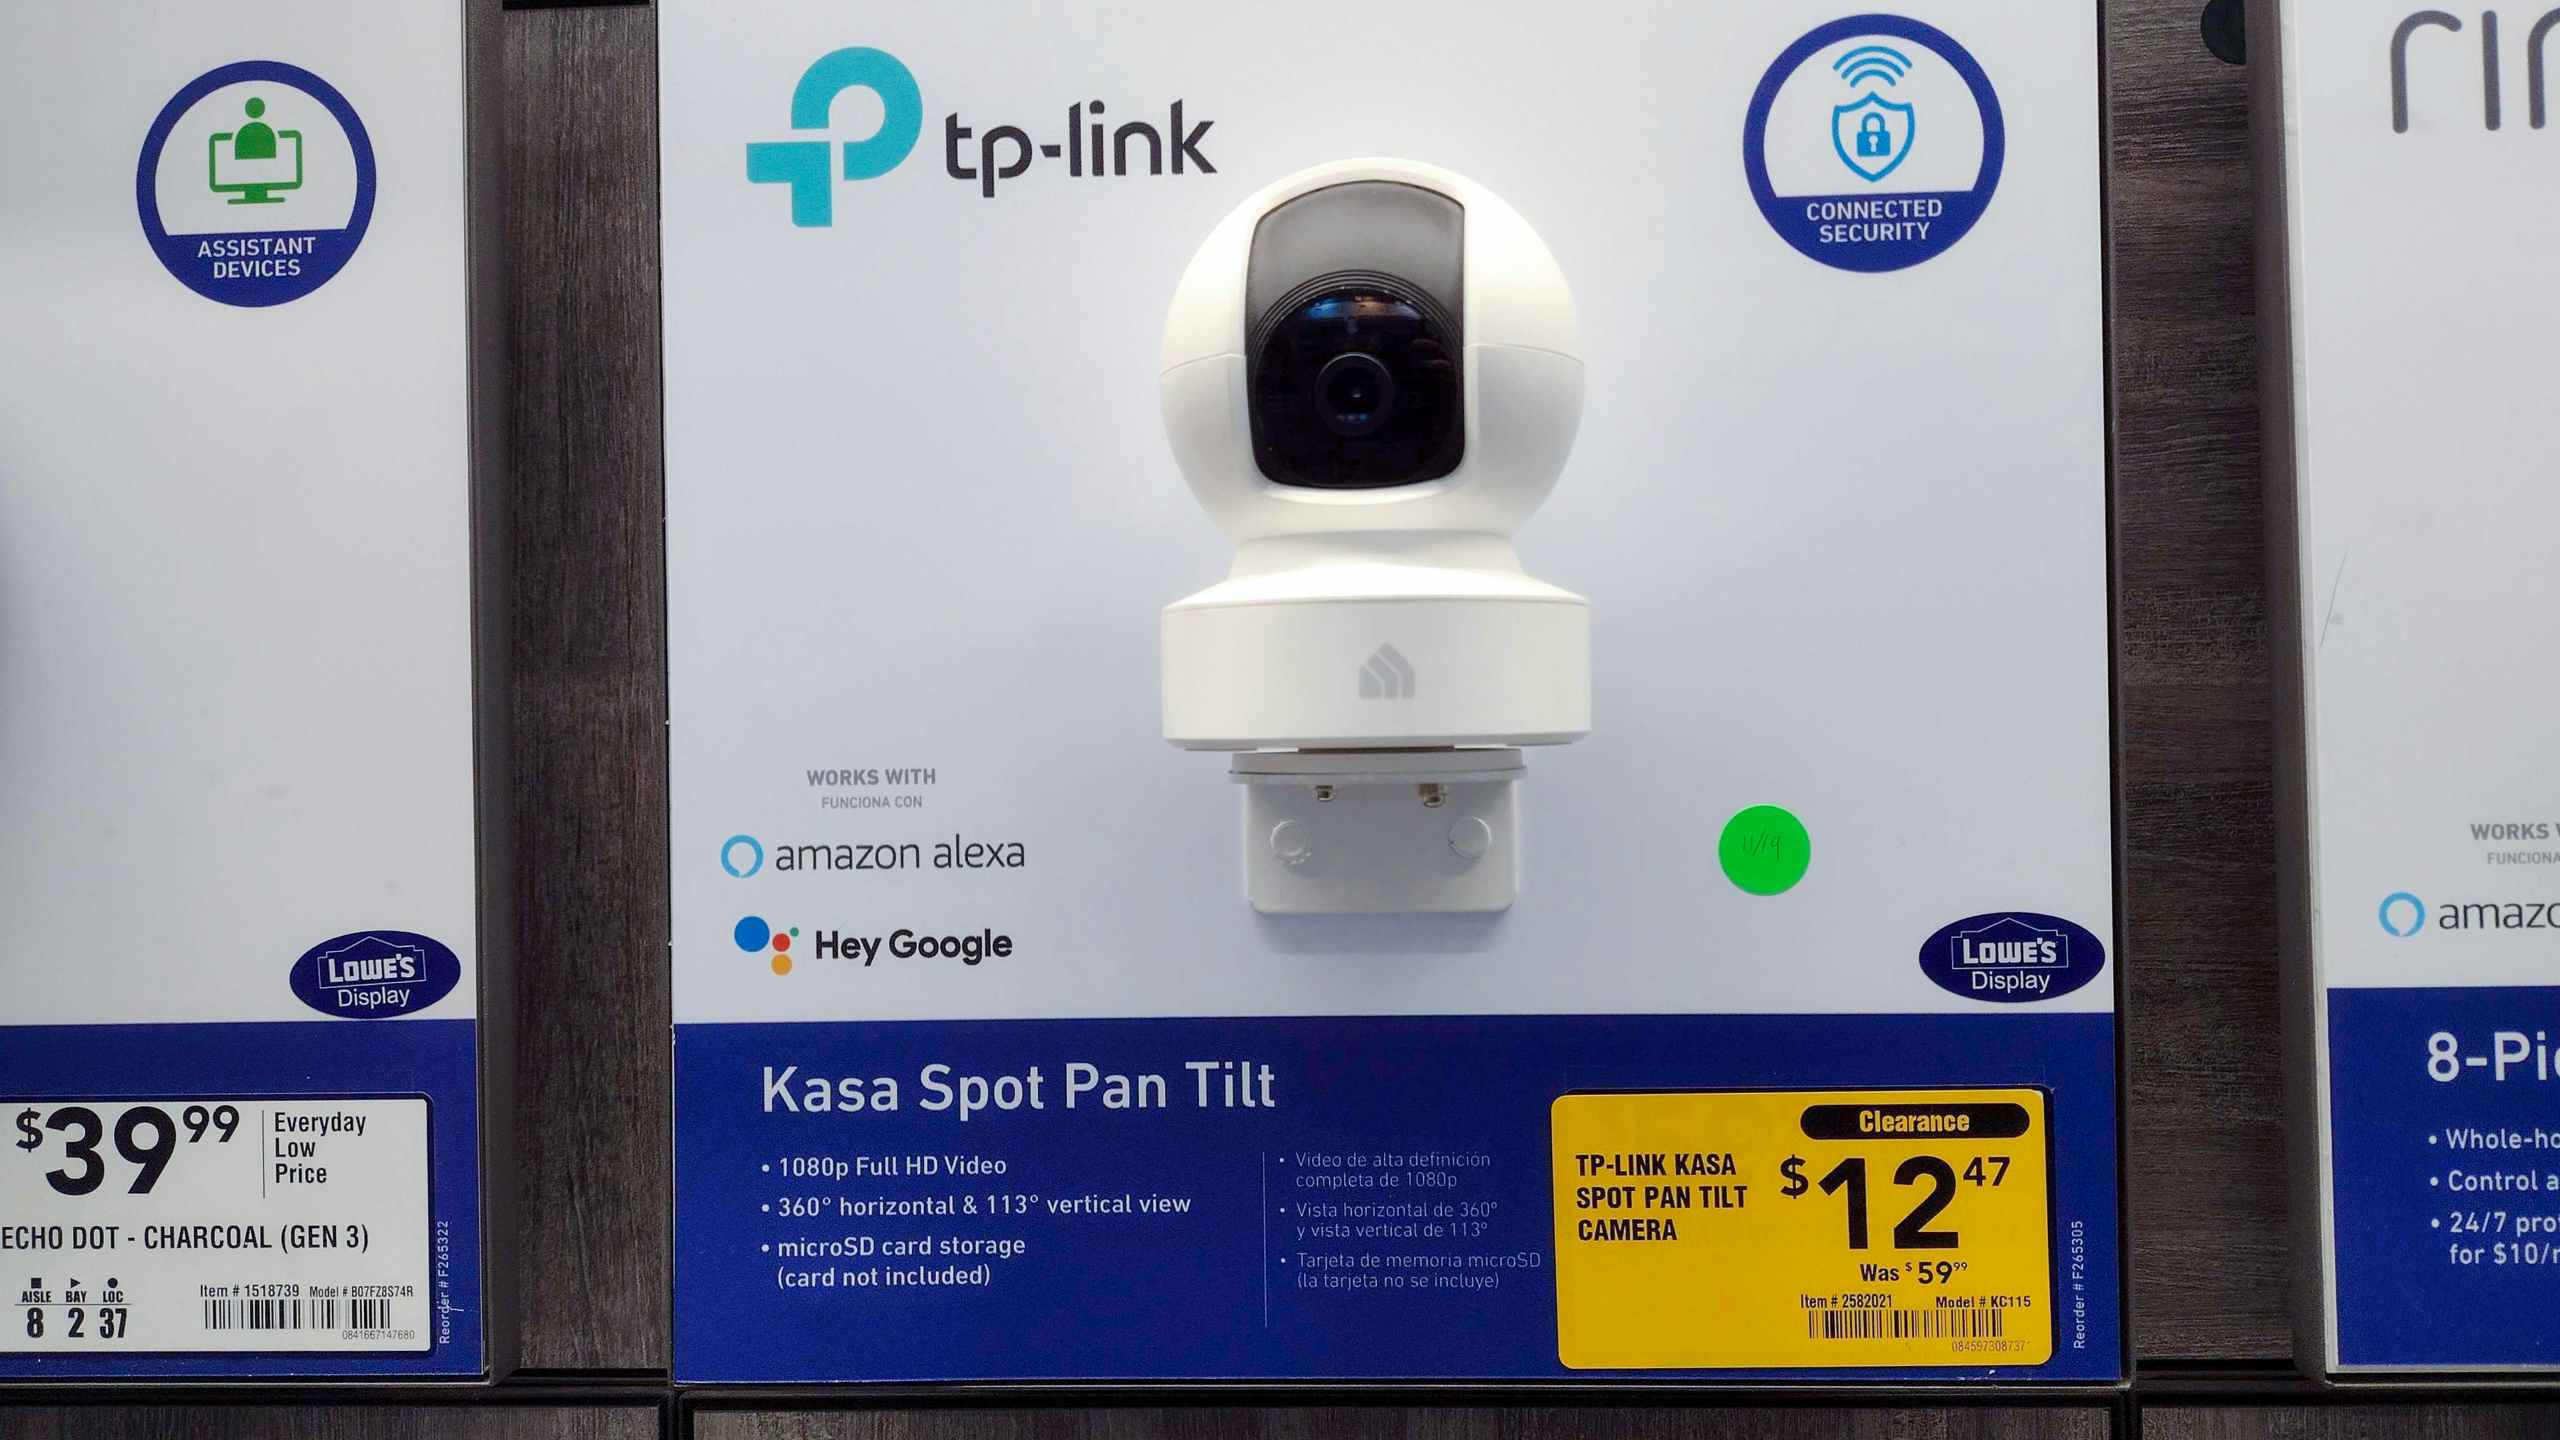 lowes year end clearance tp-link camera on shelf